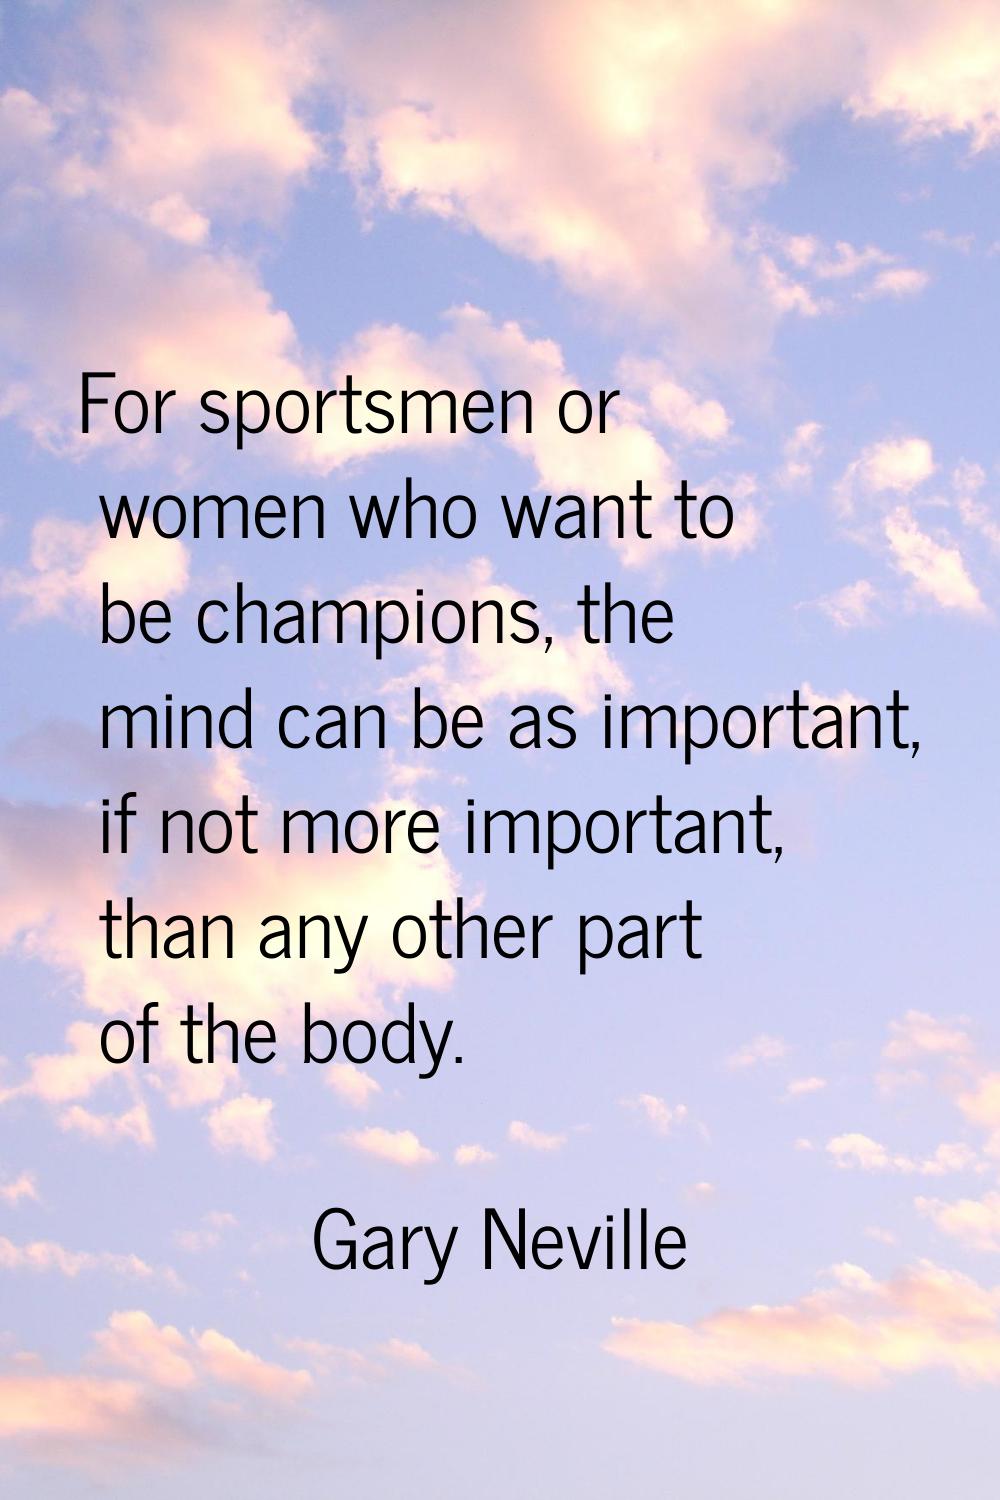 For sportsmen or women who want to be champions, the mind can be as important, if not more importan